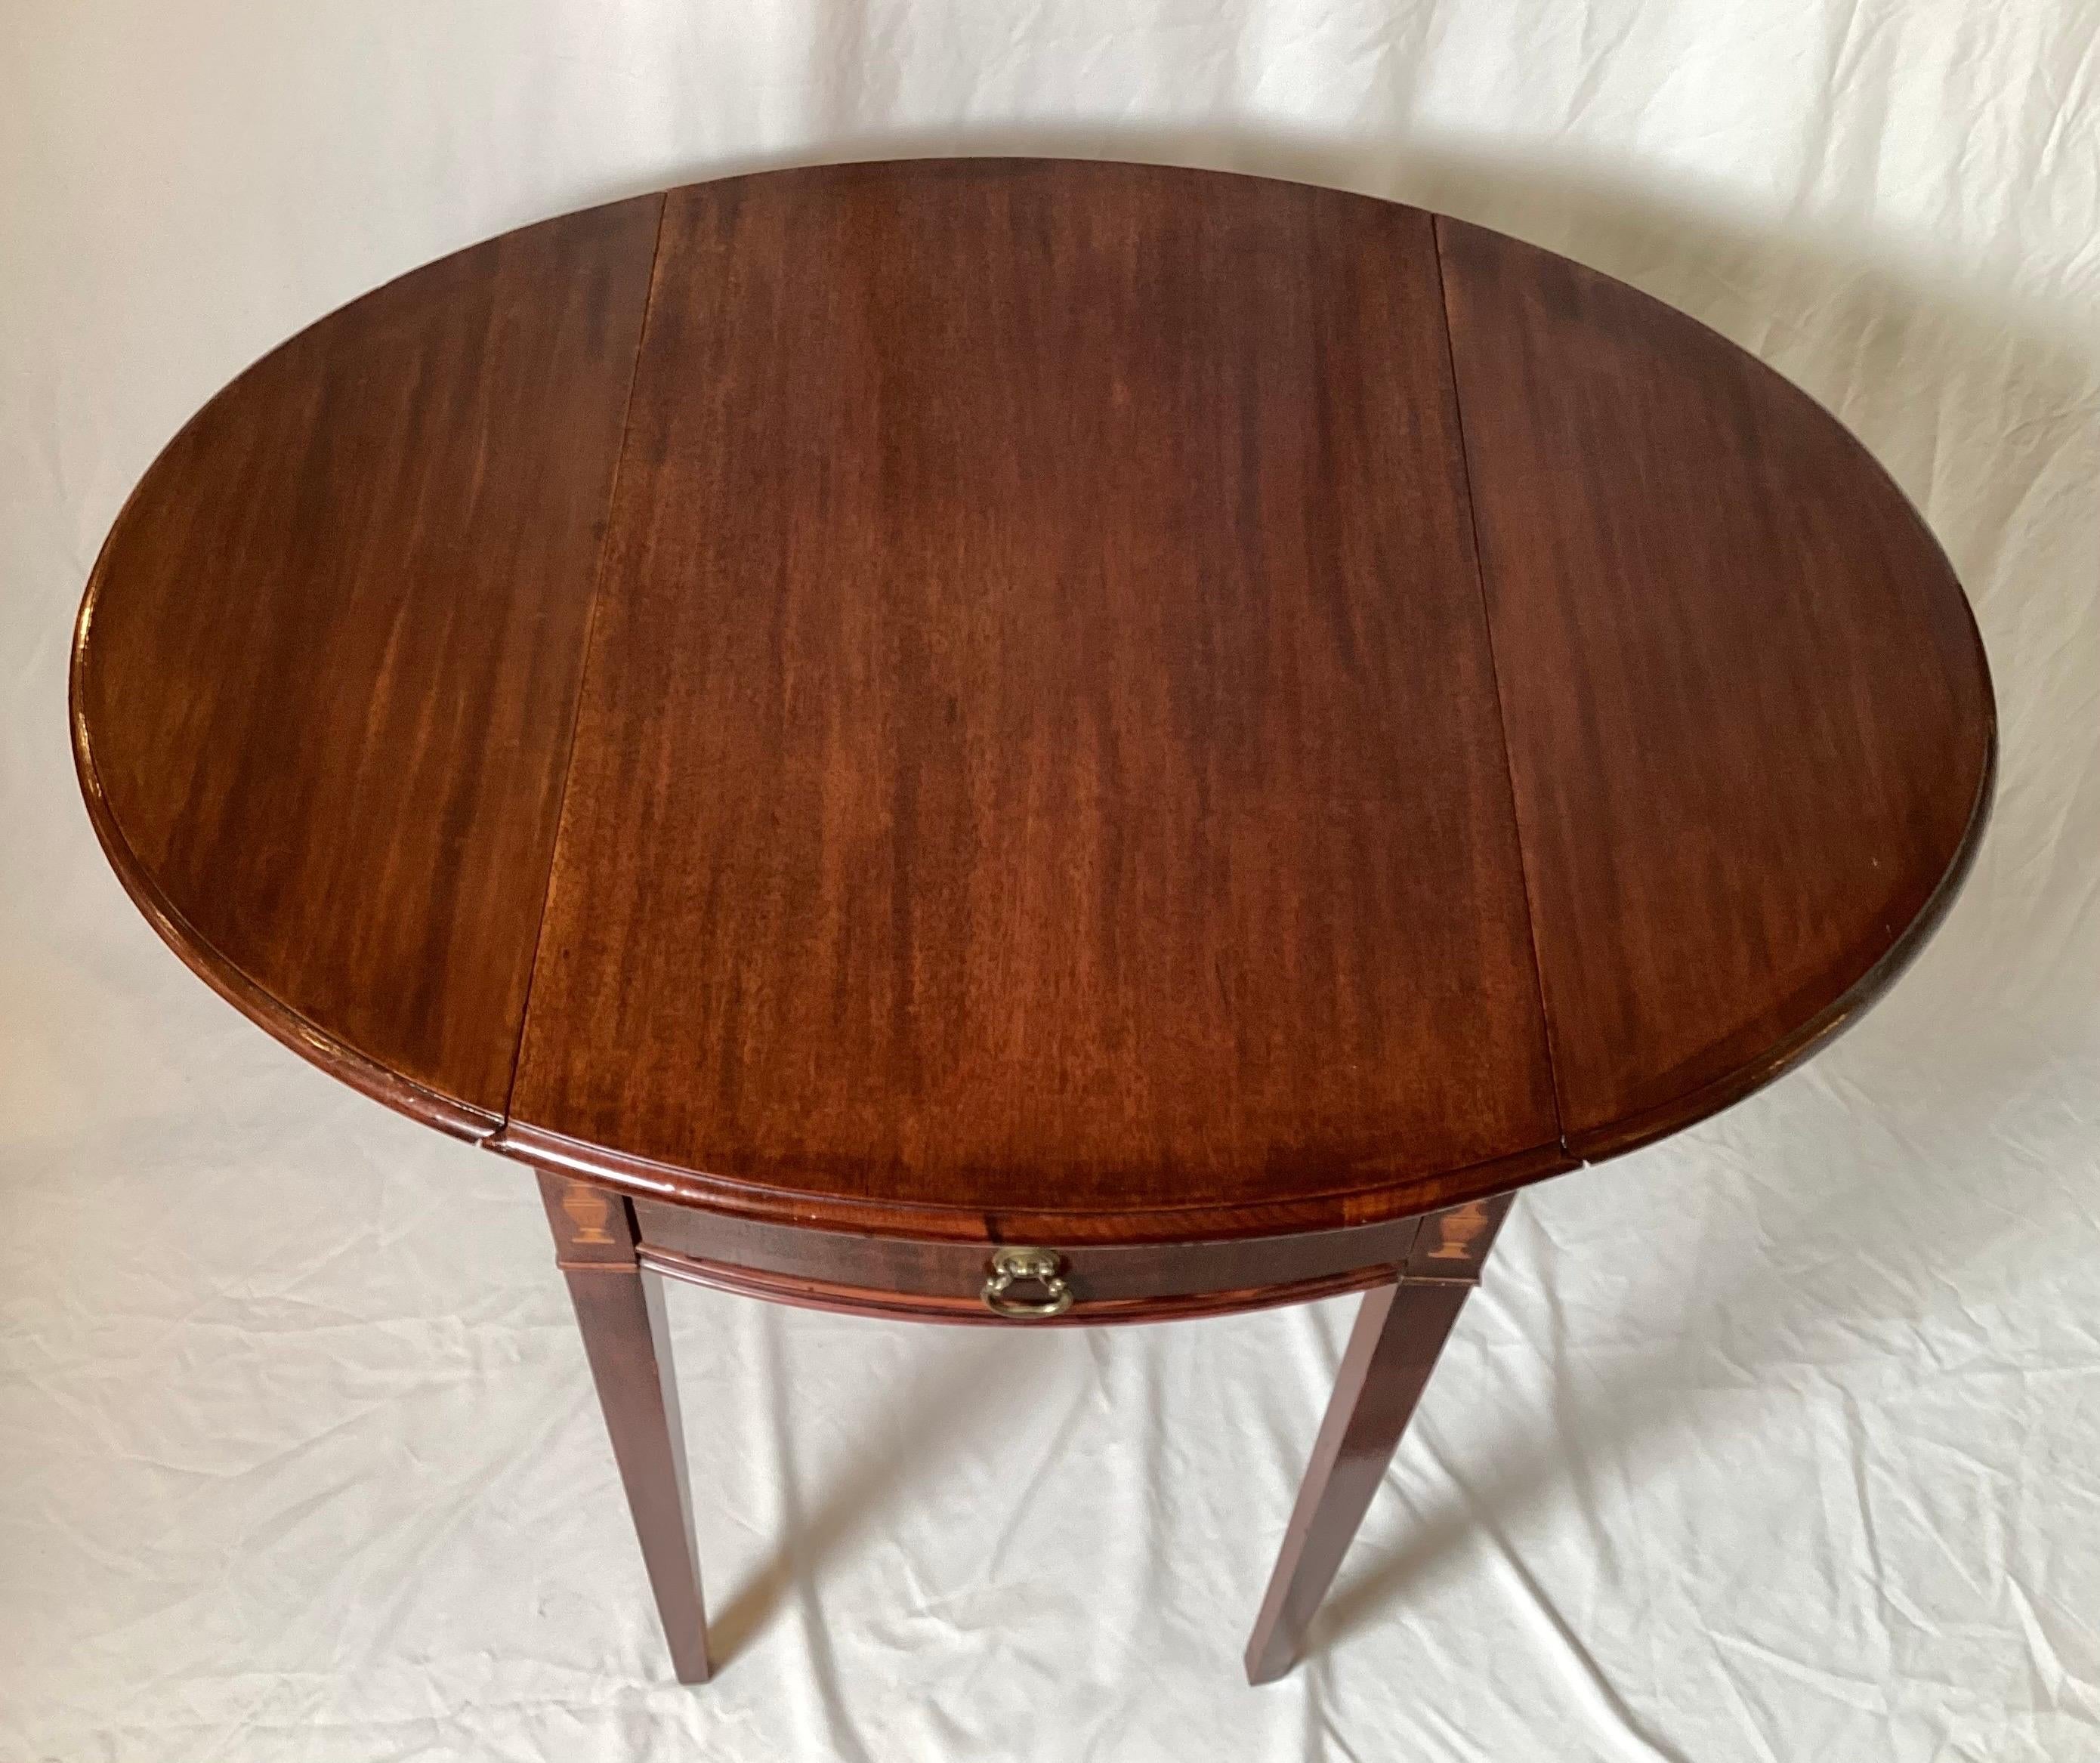 Early 20th Century Mahogany Inlaid Pembroke Table  In Good Condition For Sale In Lambertville, NJ